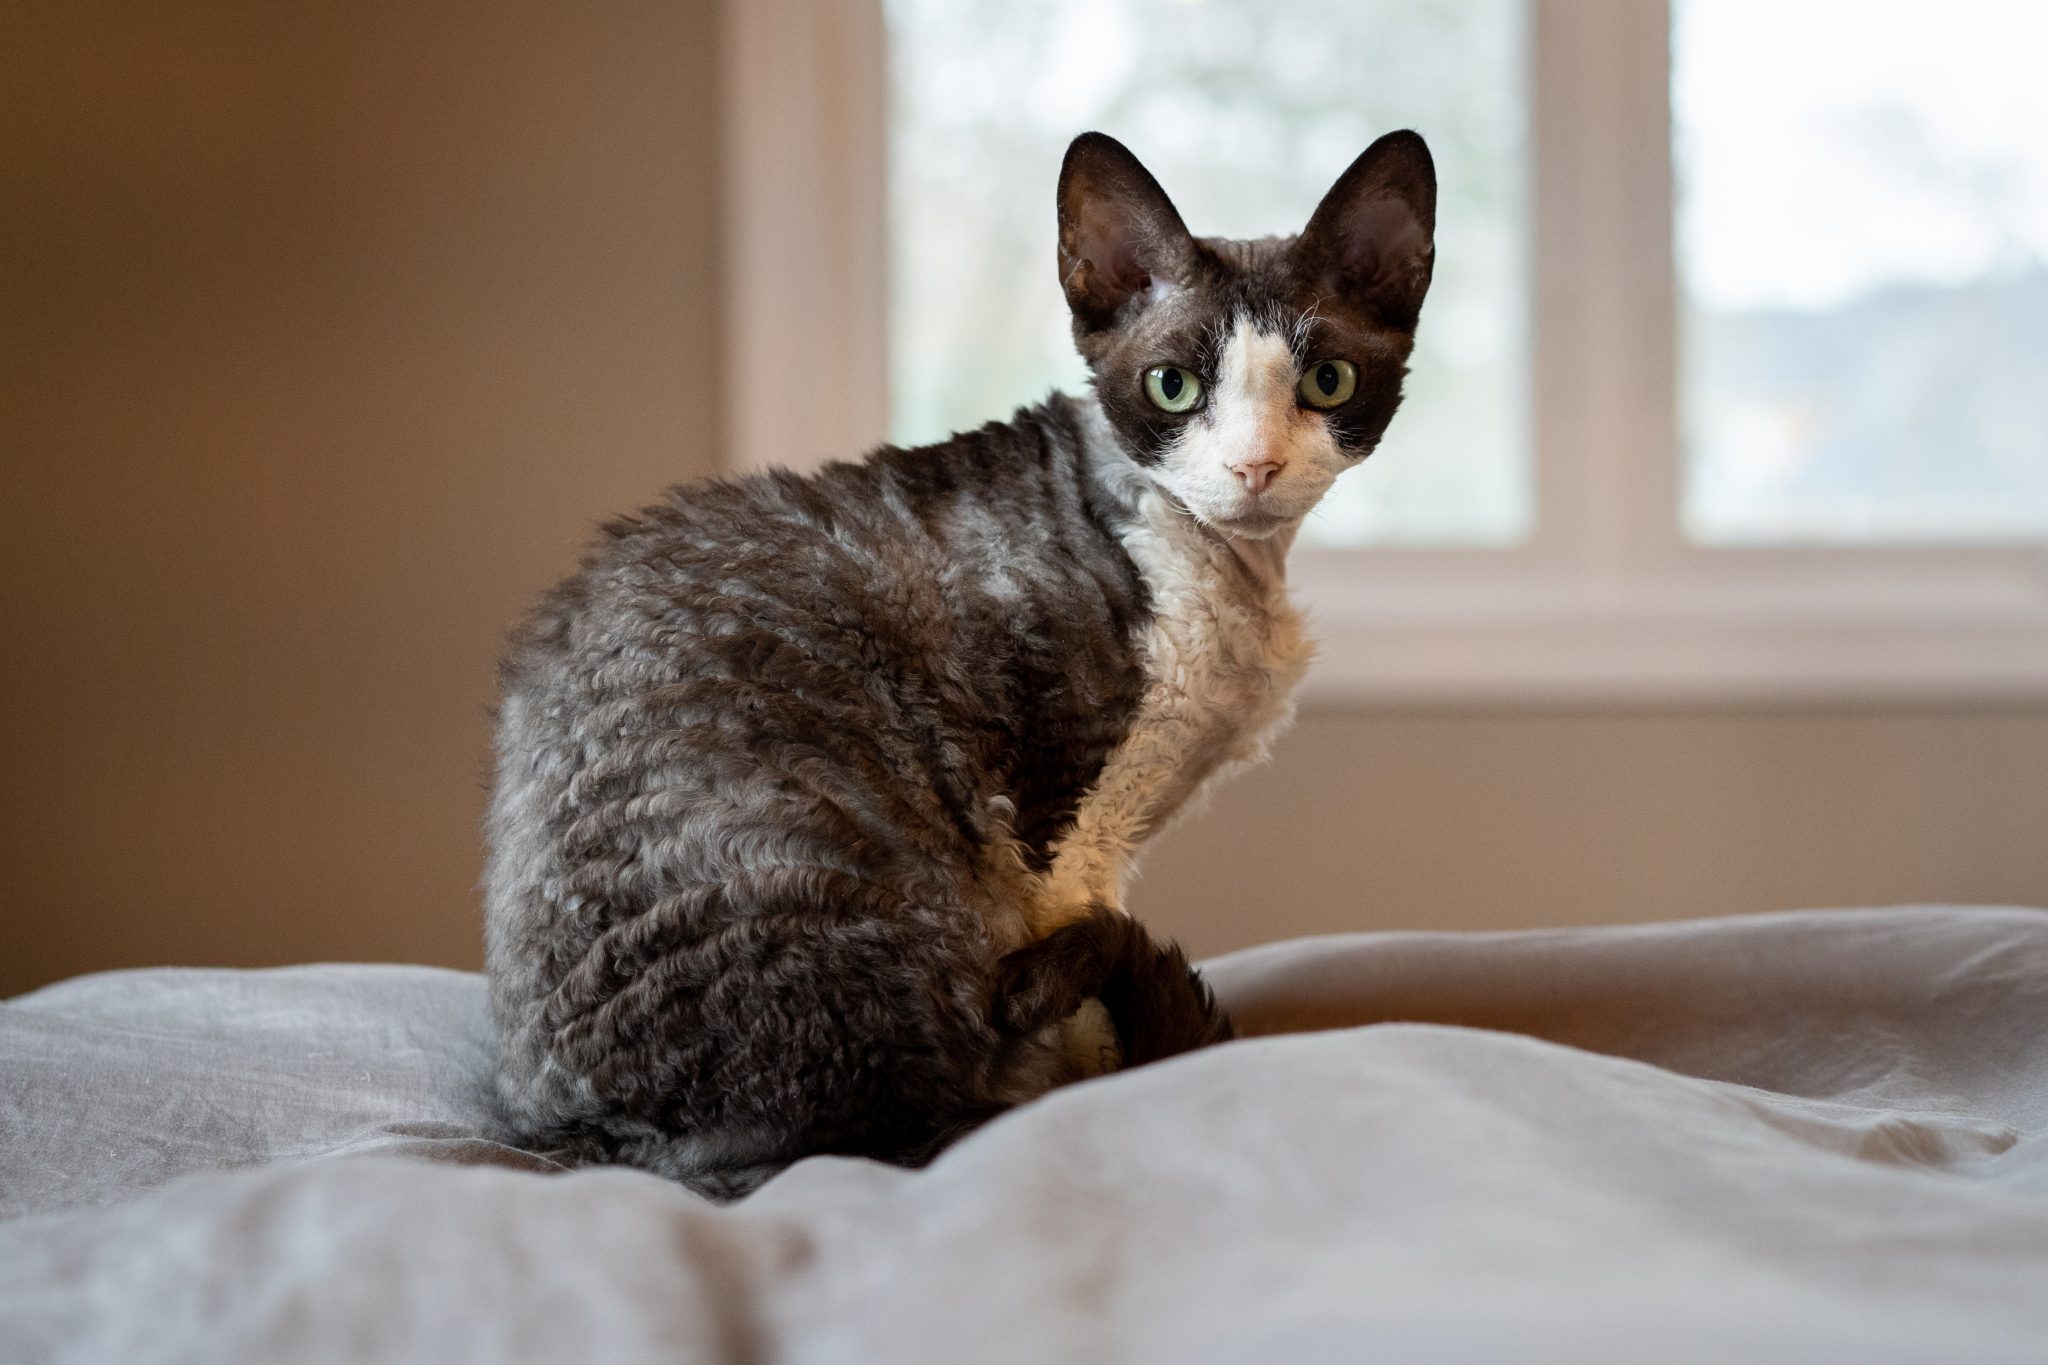 Devon Rex cat with a wavy coat looks at the camera with a window in the background